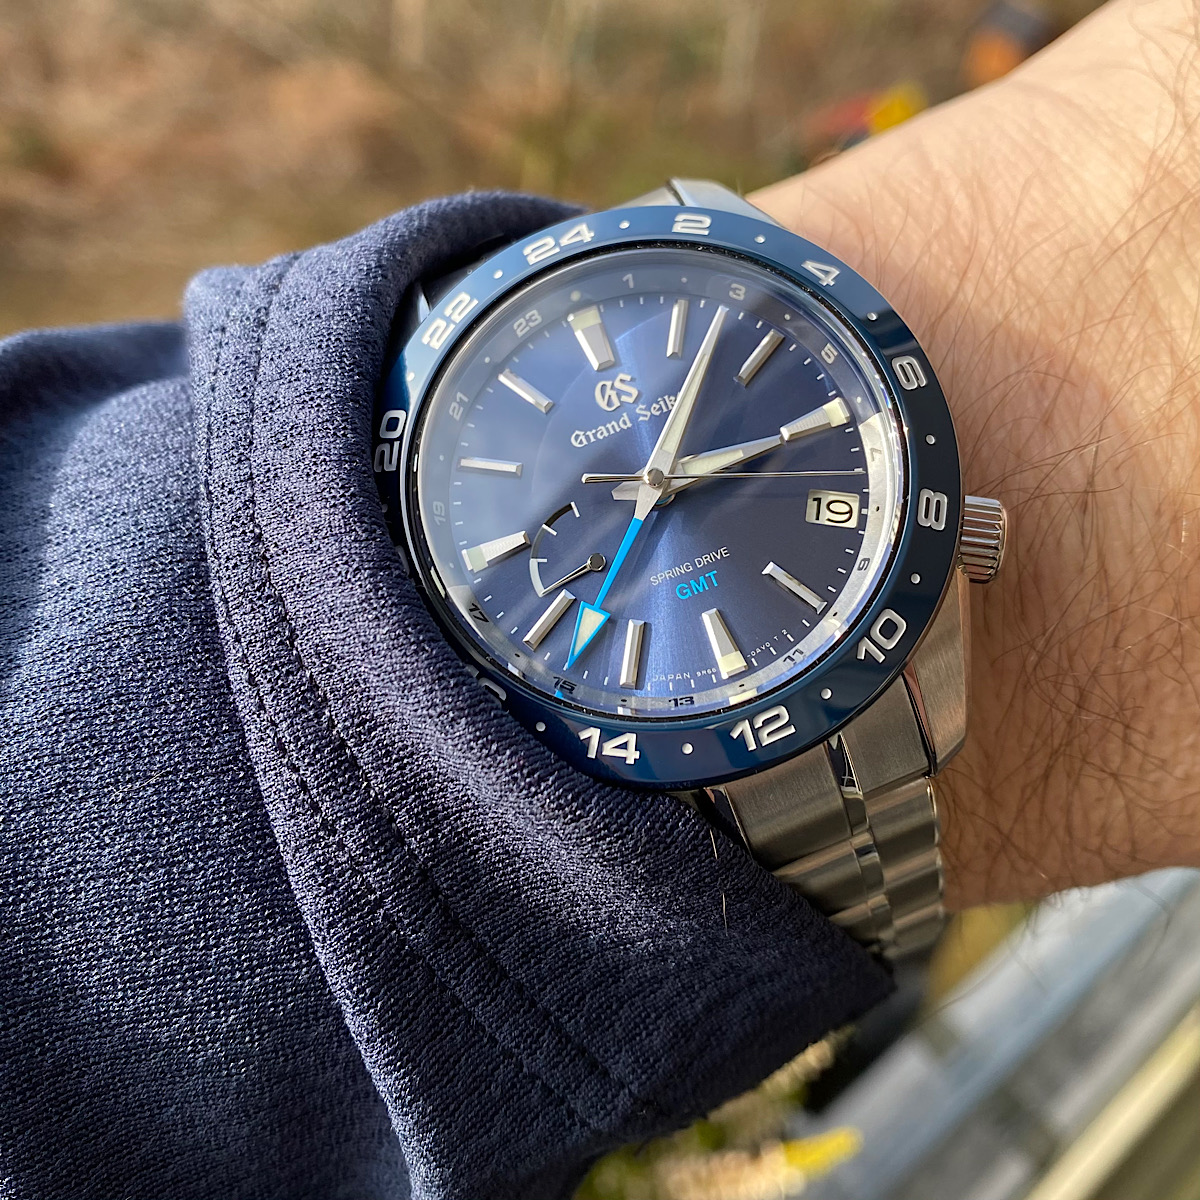 Is Grand Seiko getting better? | Page 16 | Omega Forums